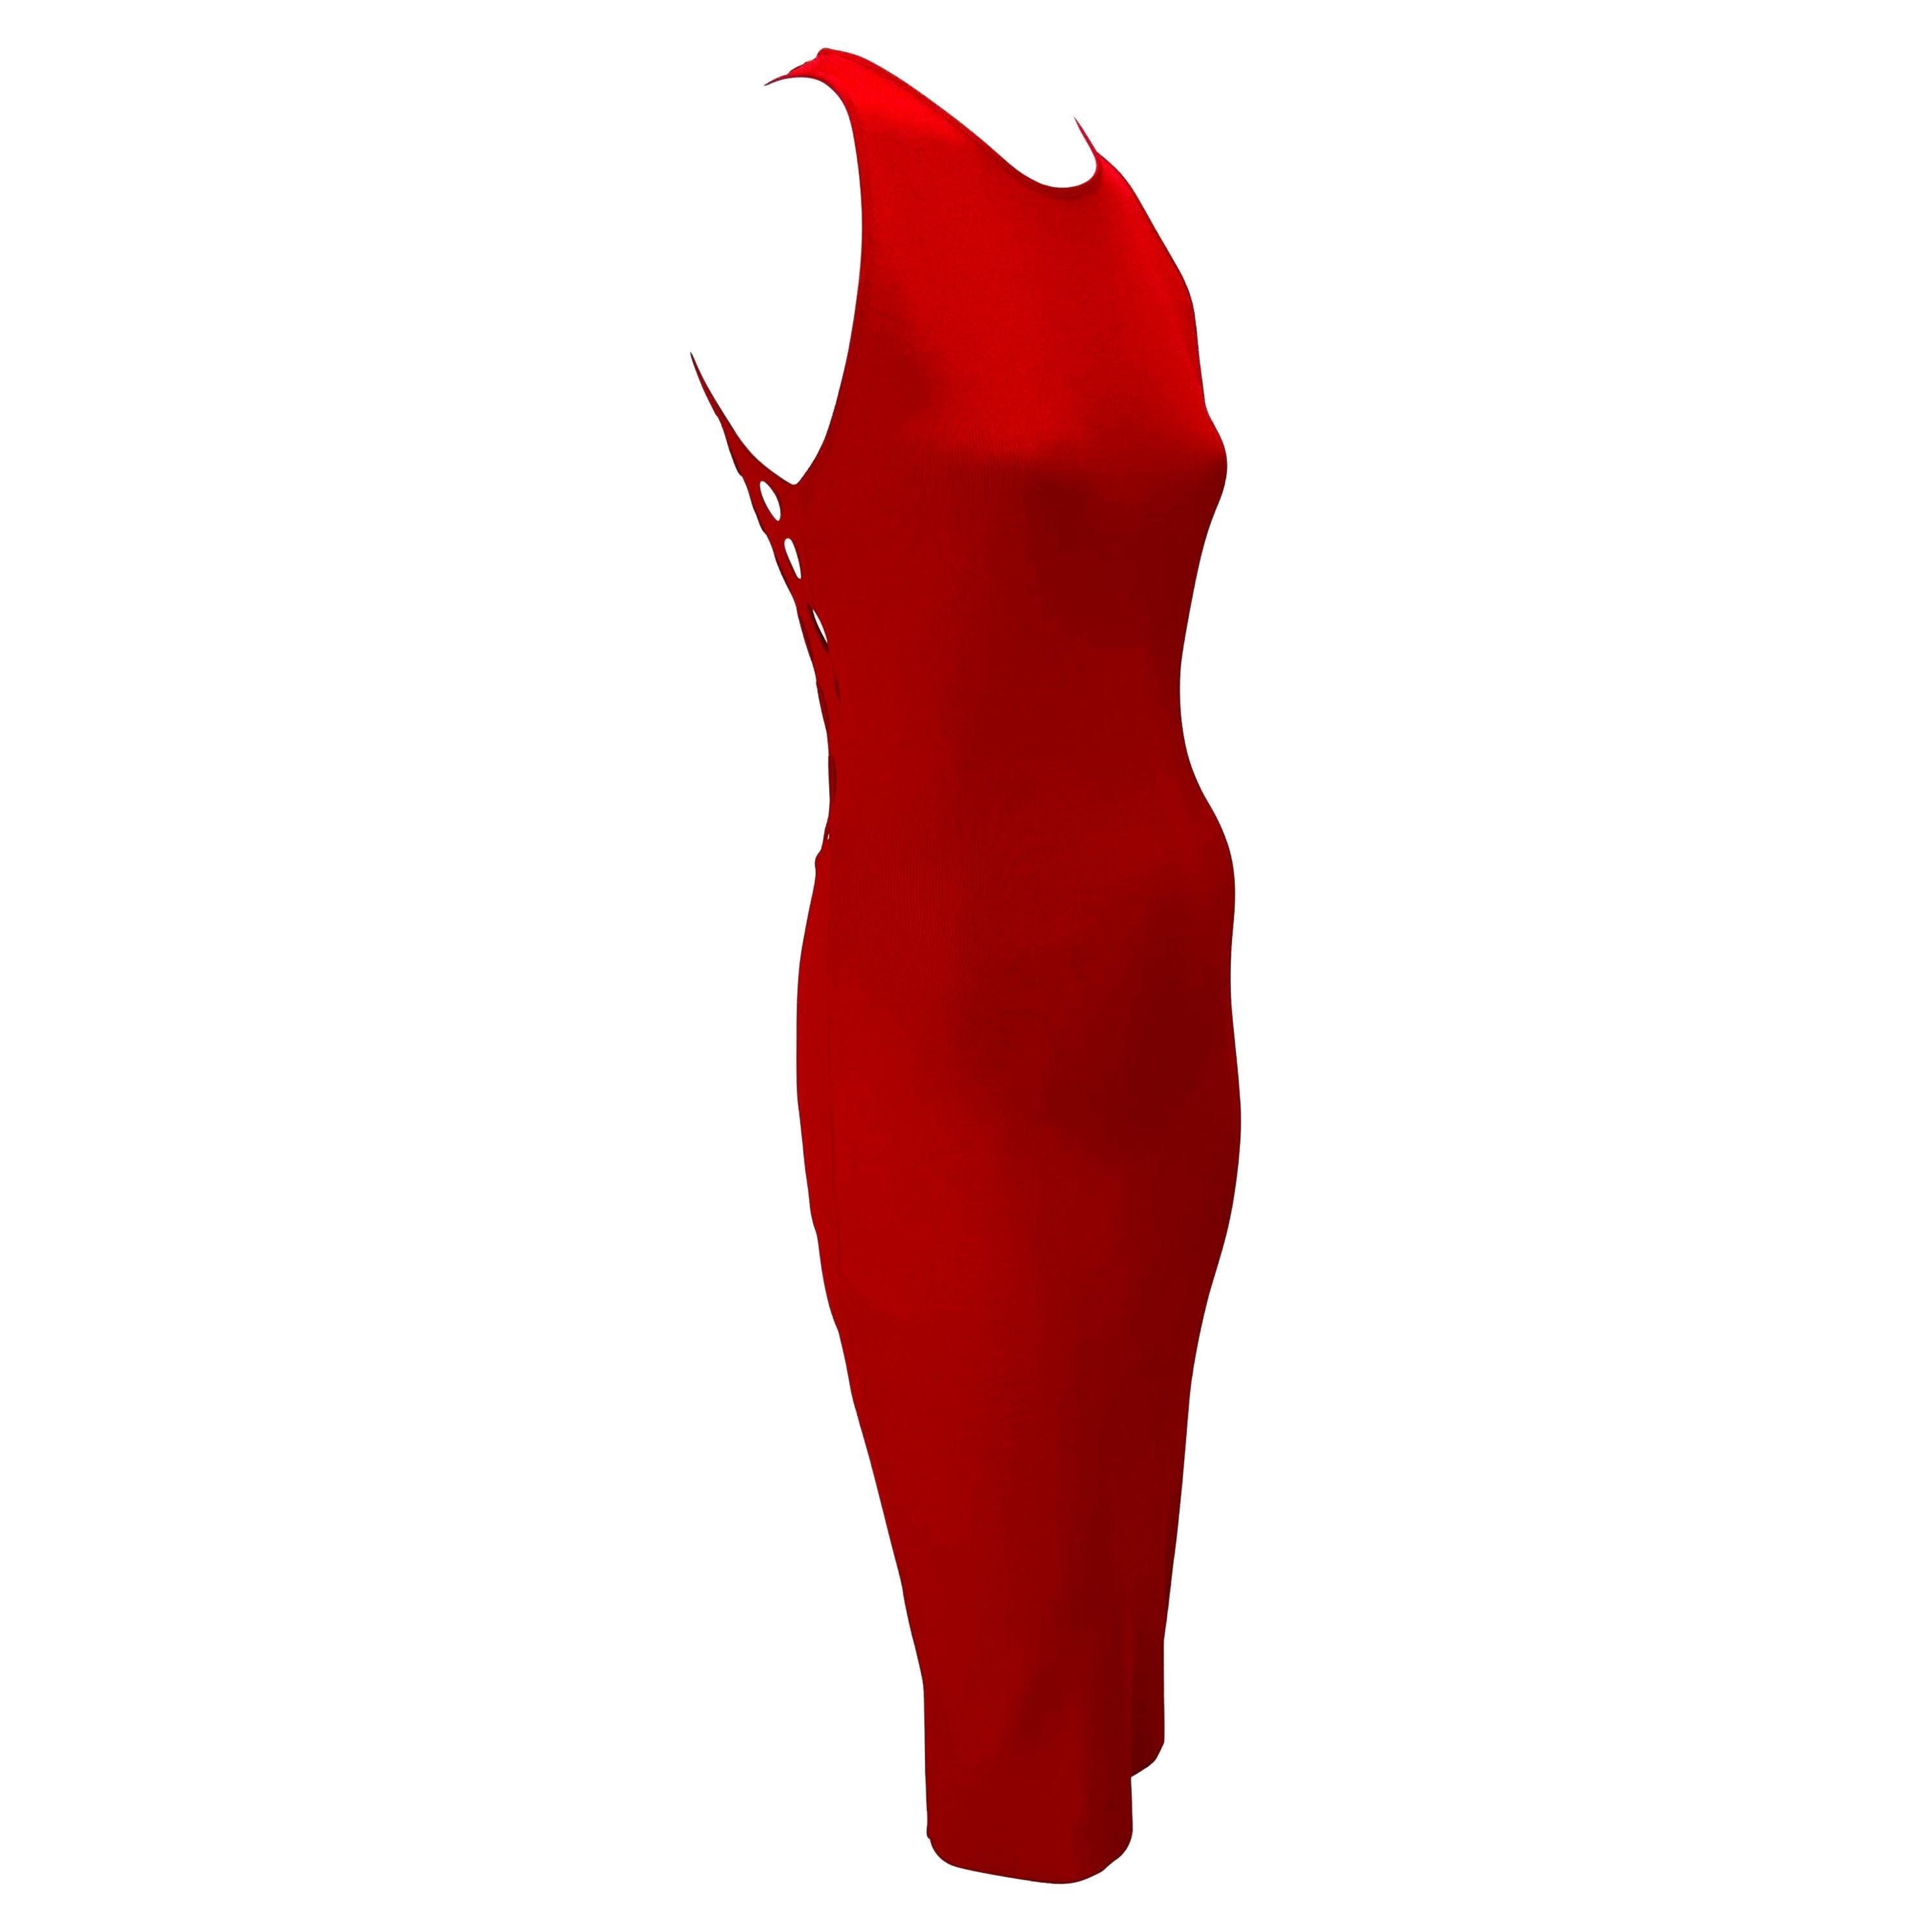 S/S 2002 Gianni Versace by Donatella Red Eyelet Cutout Stretch Racerback Dress In Good Condition For Sale In West Hollywood, CA